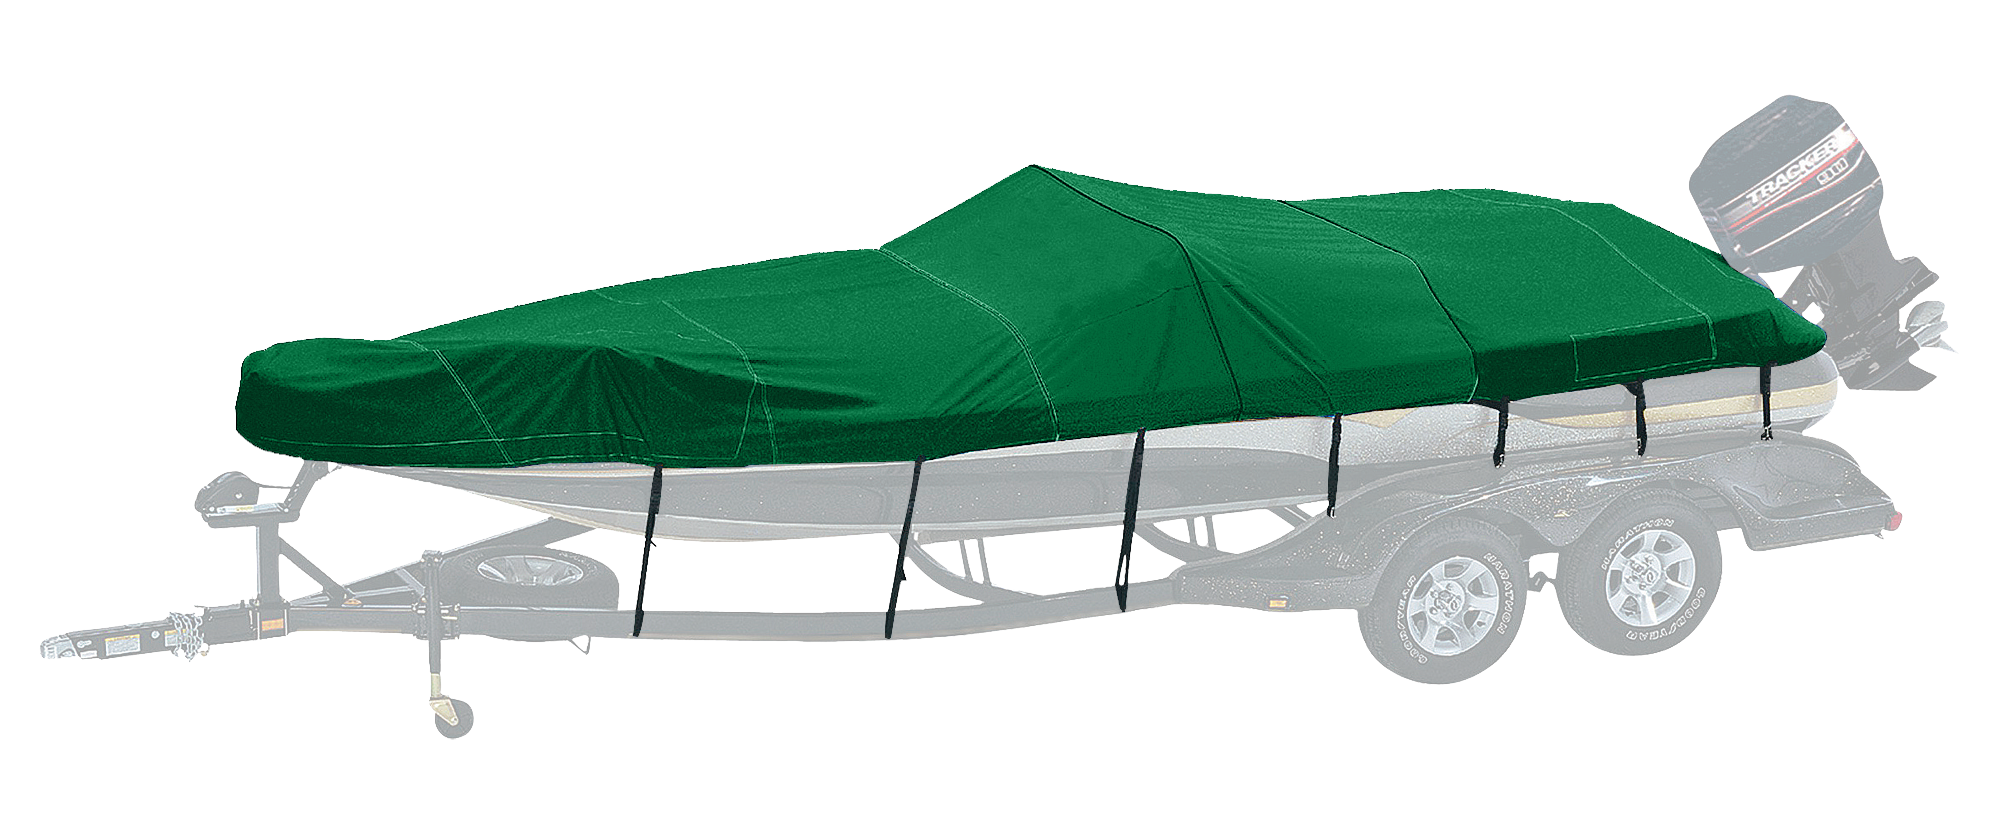 Bass Pro Shops Westland Exact Fit Boat Cover - Tahoe Boats - 2004-2005 Q4 I/O - Forest Green